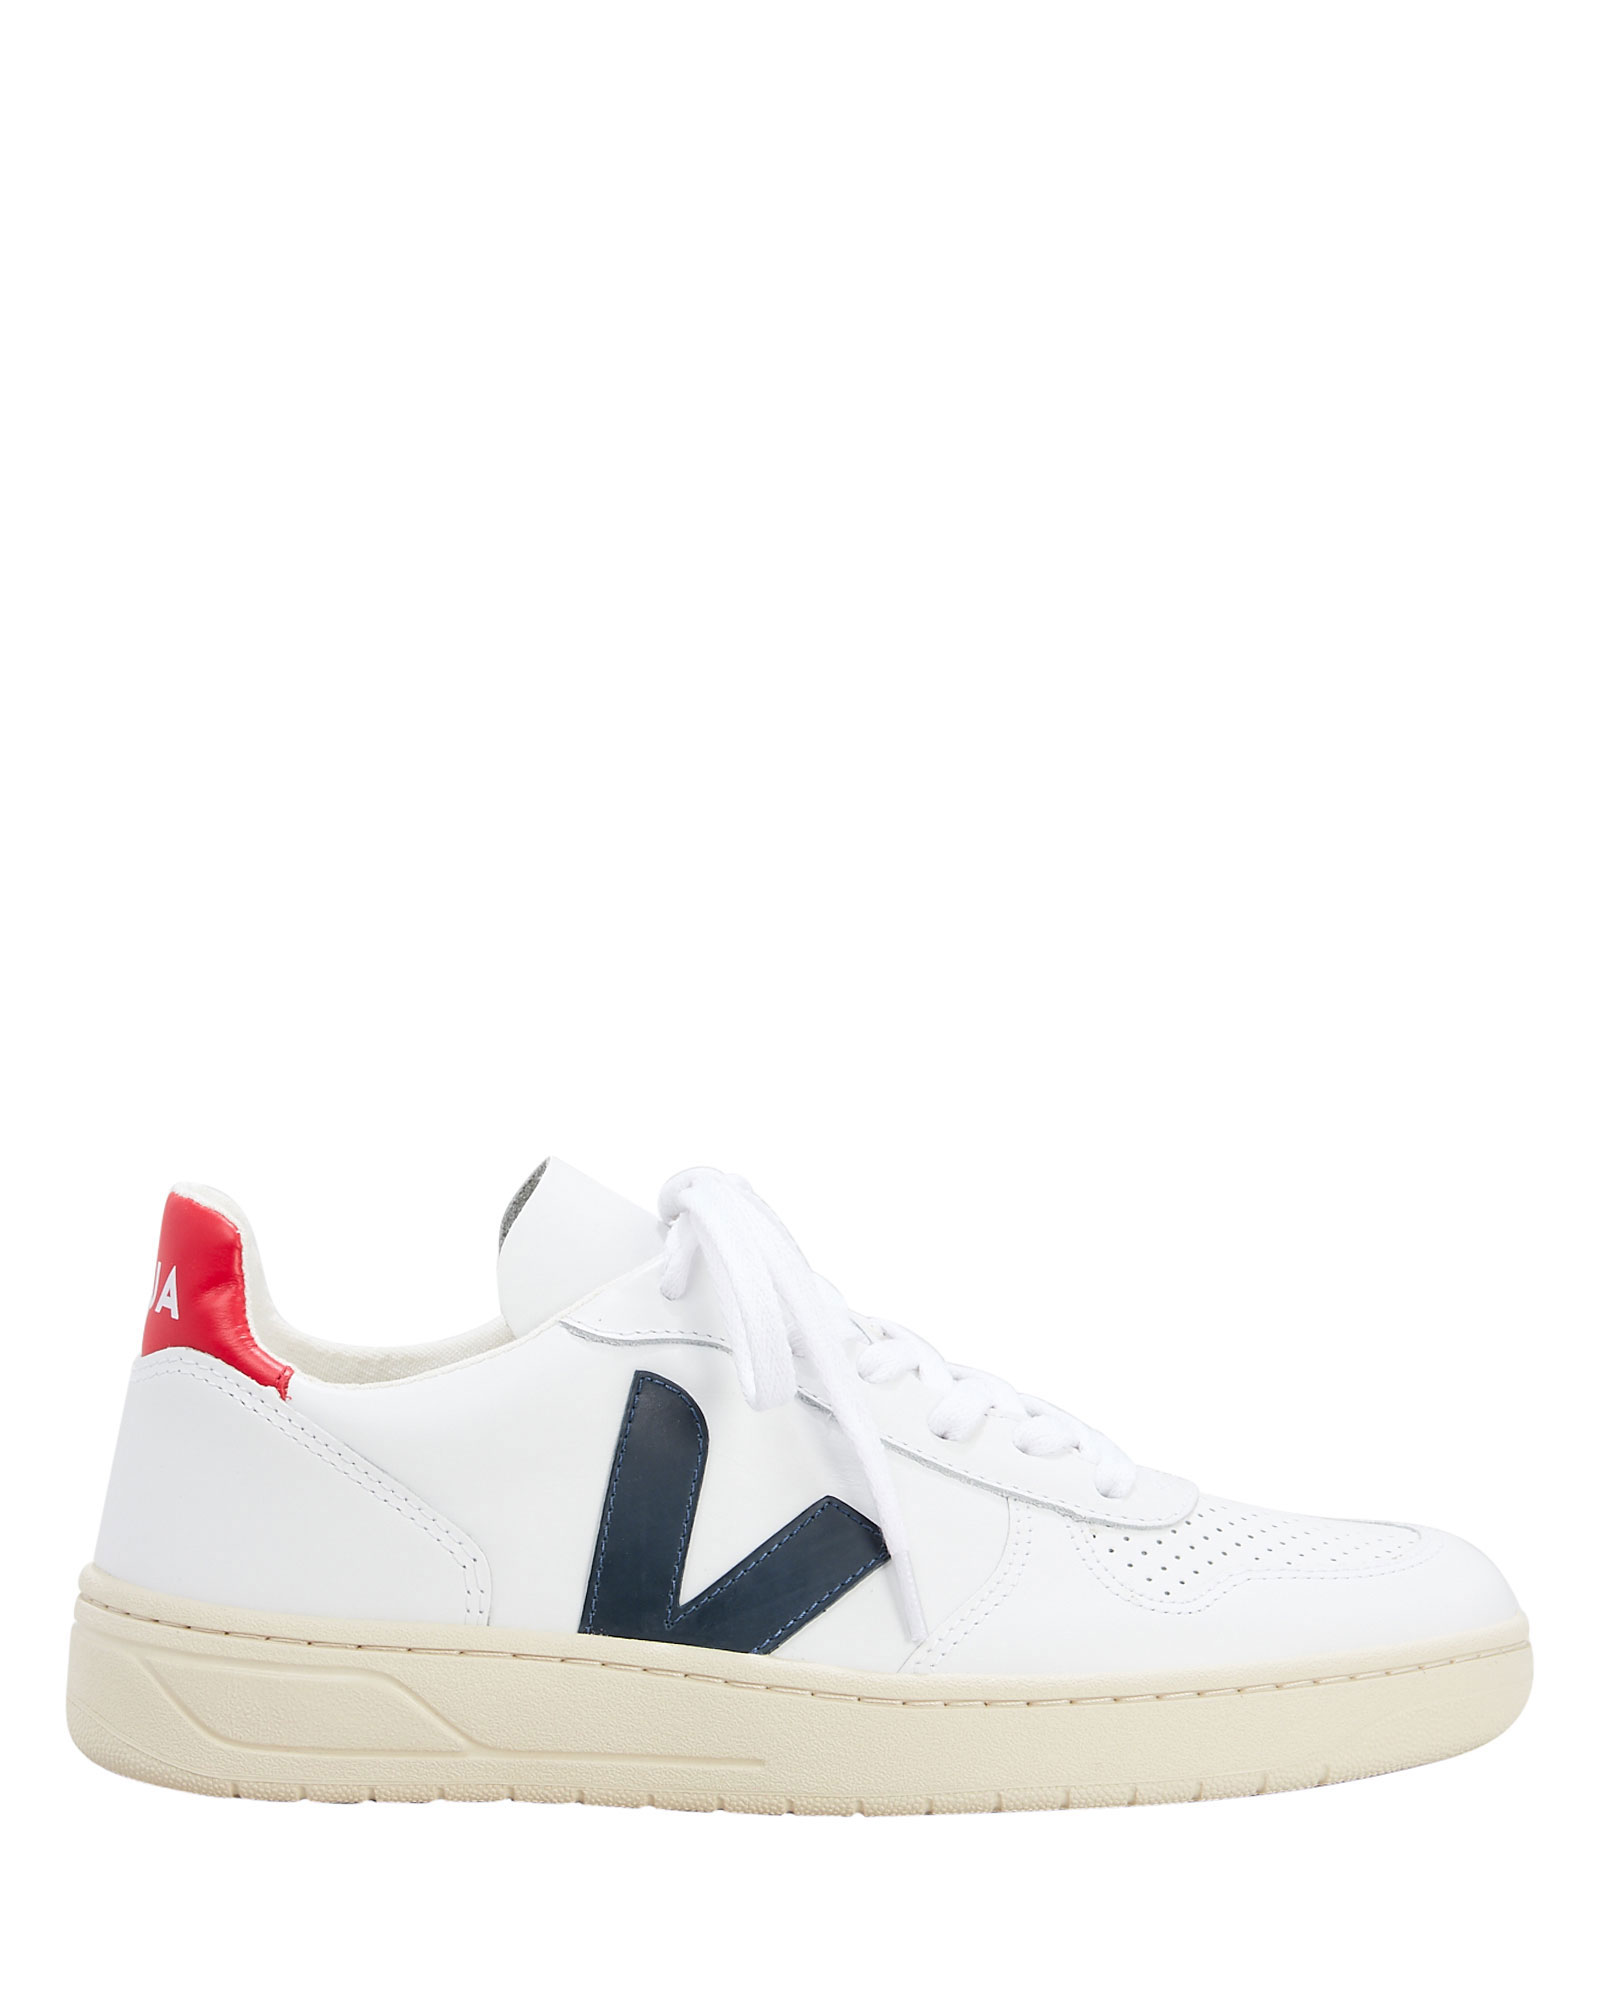 Veja V-10 Bball Low-Top Sneakers | INTERMIX®